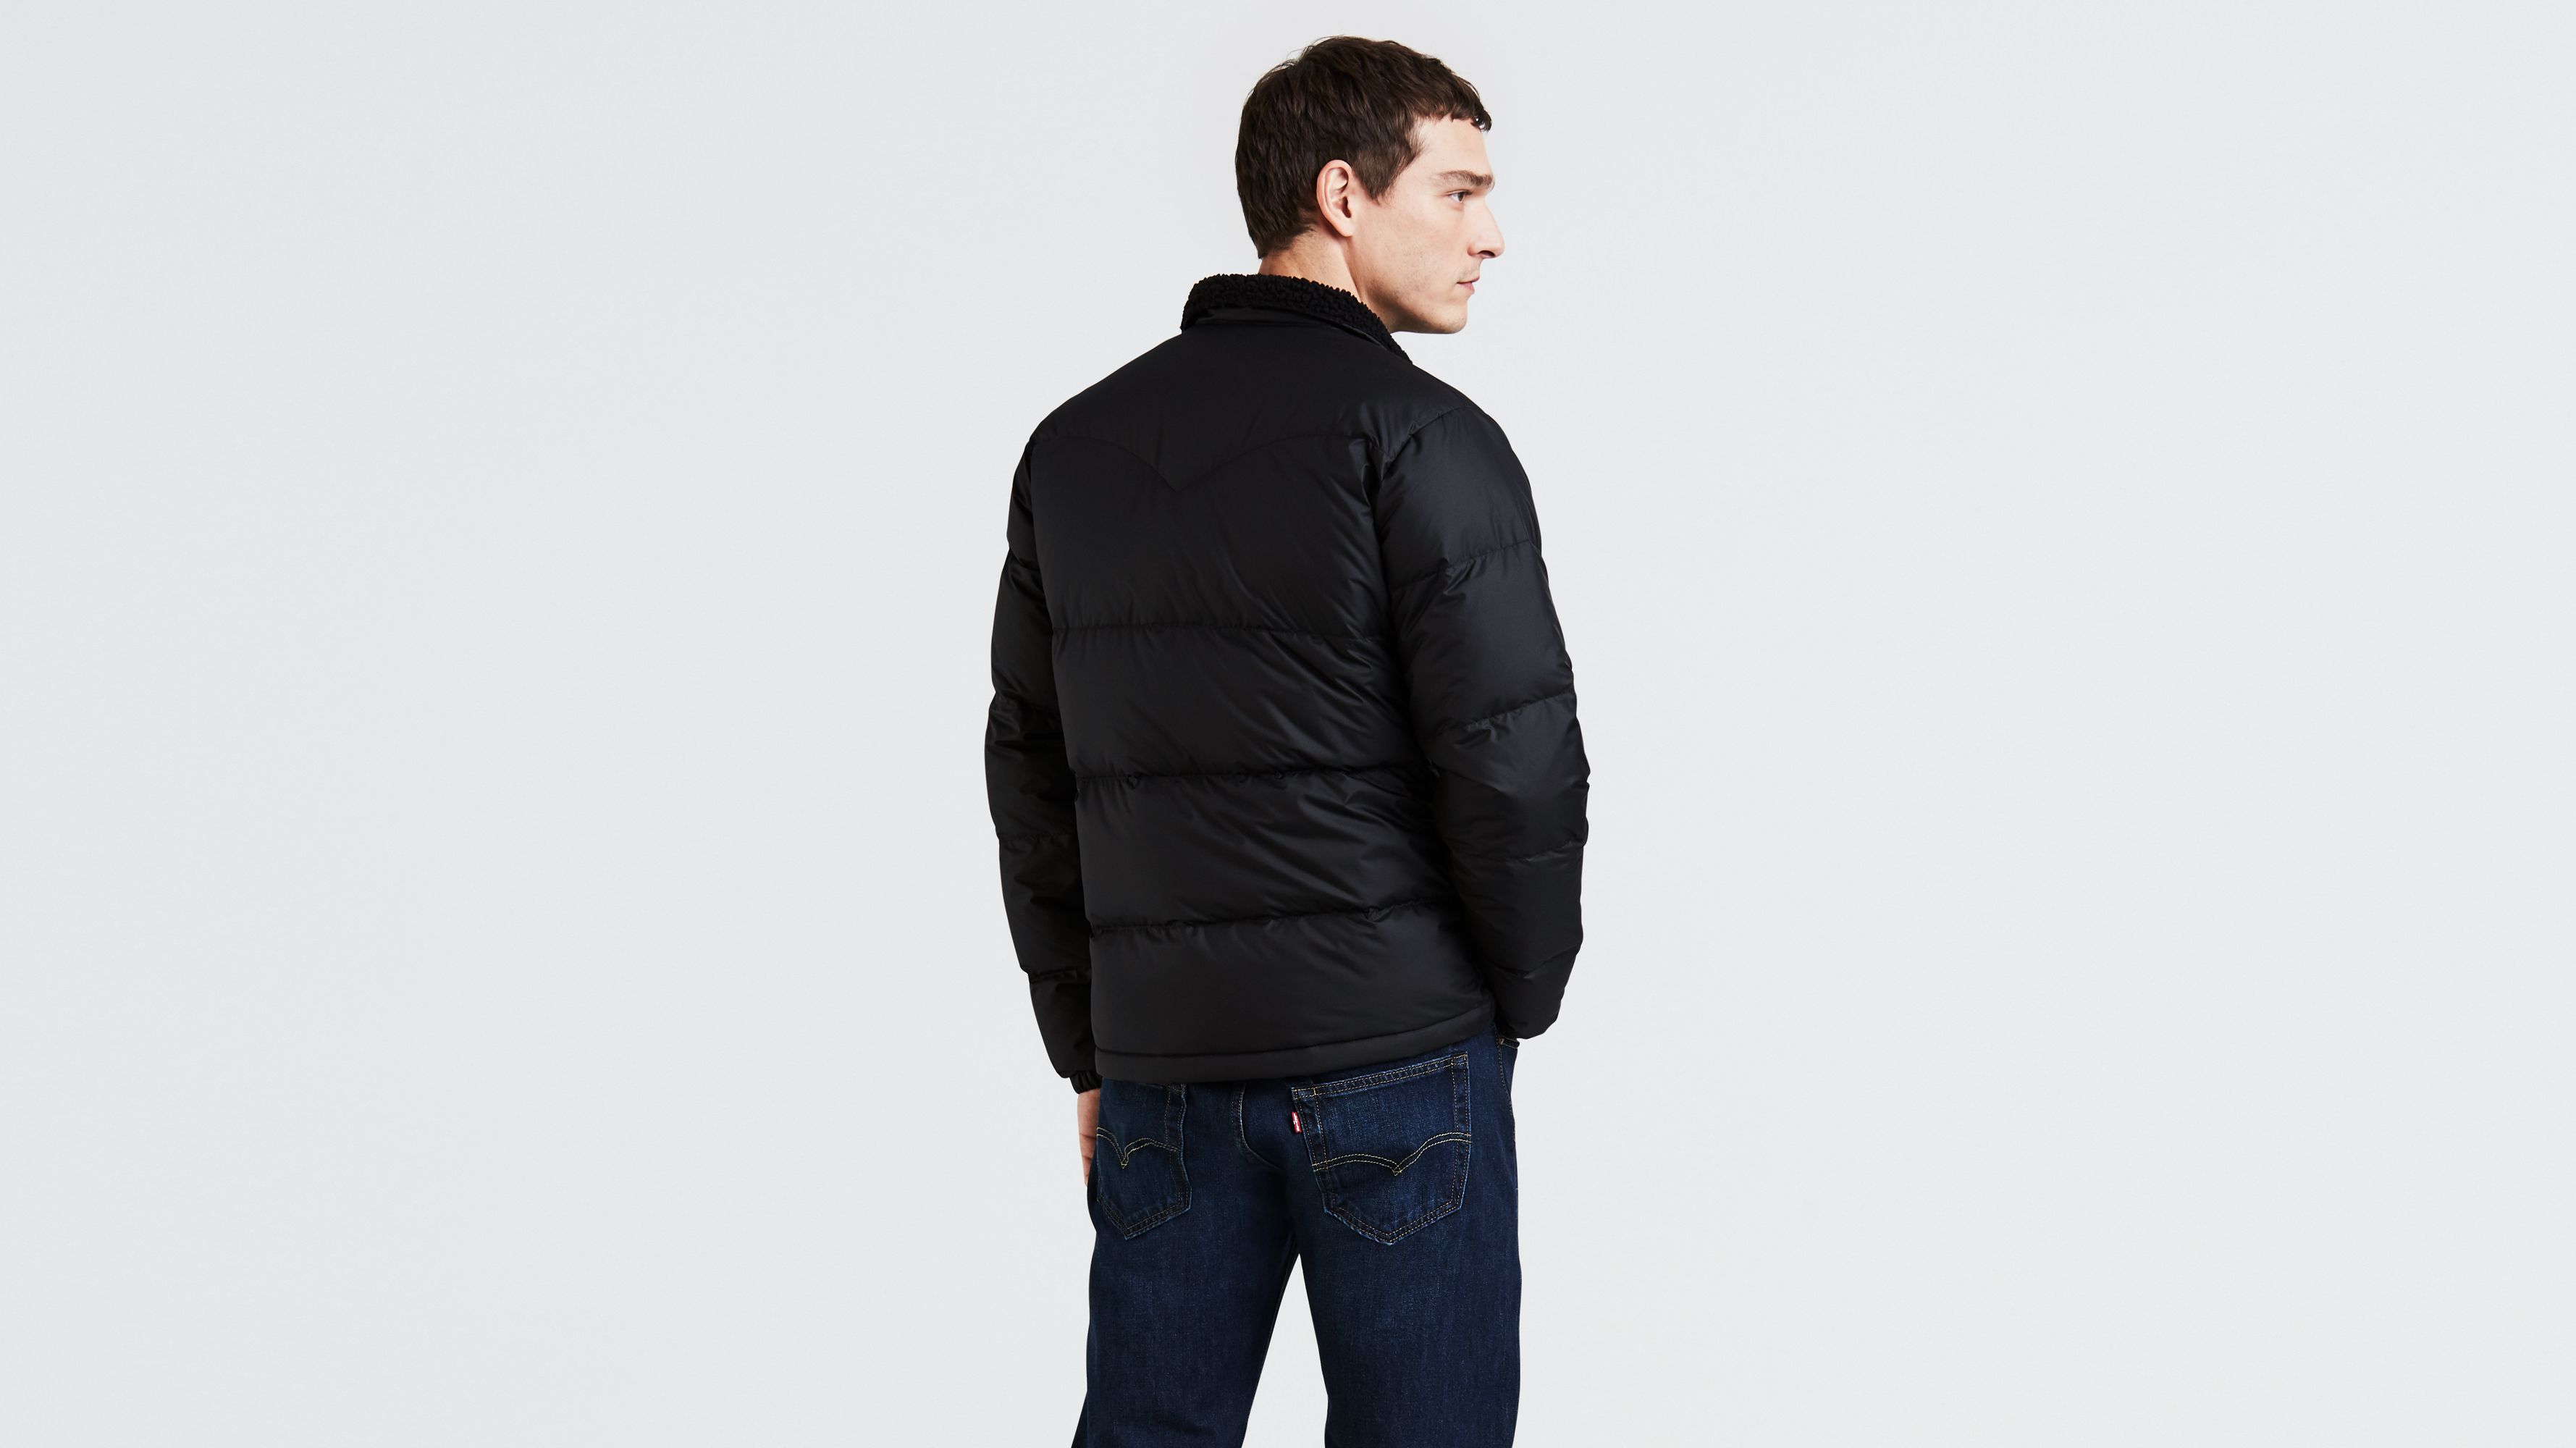 levi's down barstow puffer jacket